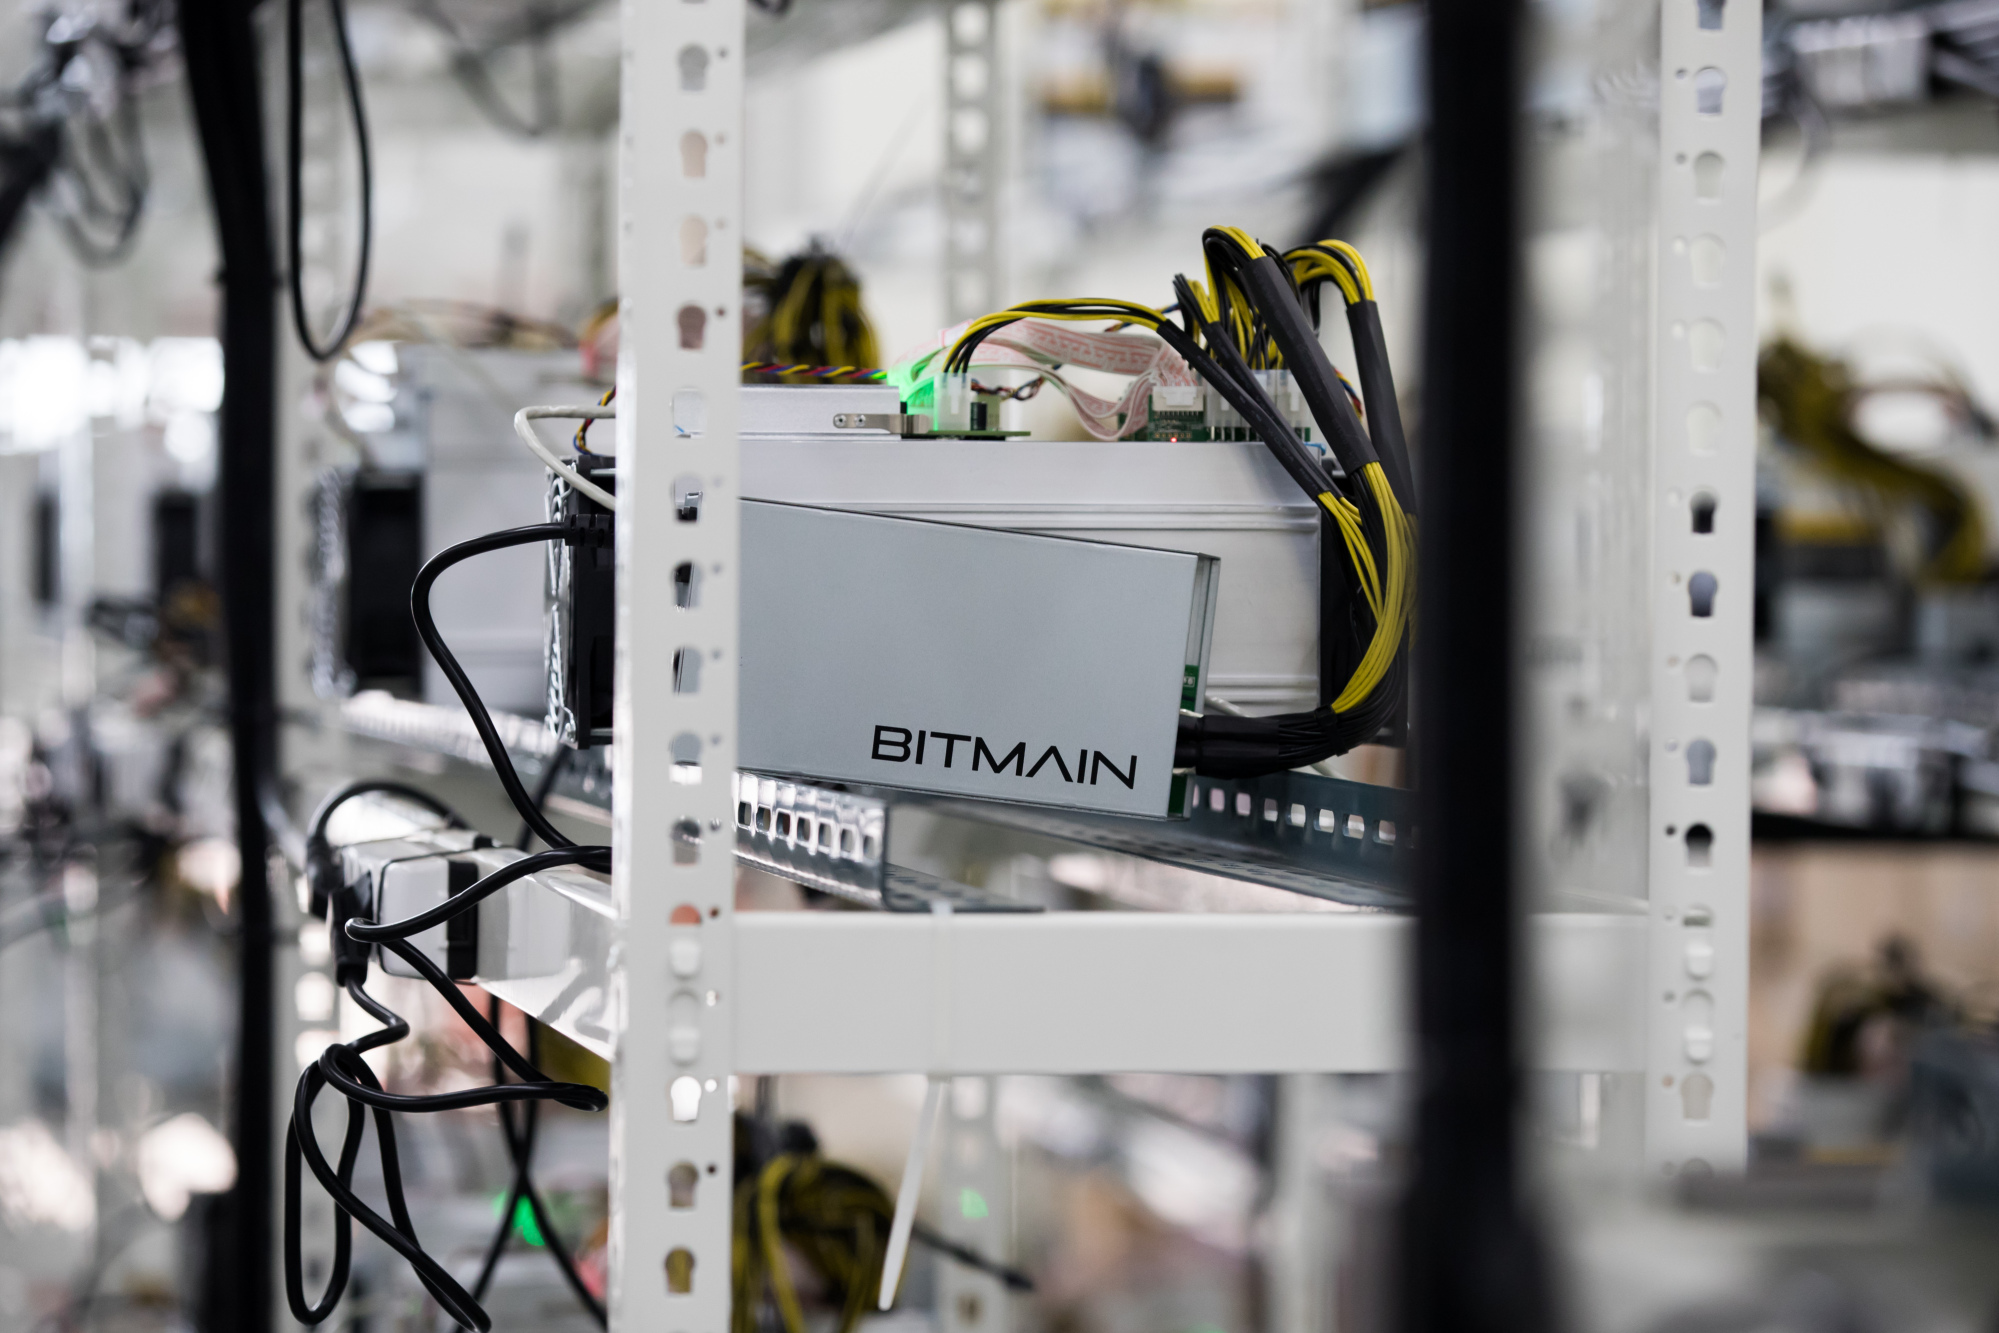 A Bitmain Technologies Inc. device&nbsp;at a cryptocurrency mining facility in Incheon, South Korea.